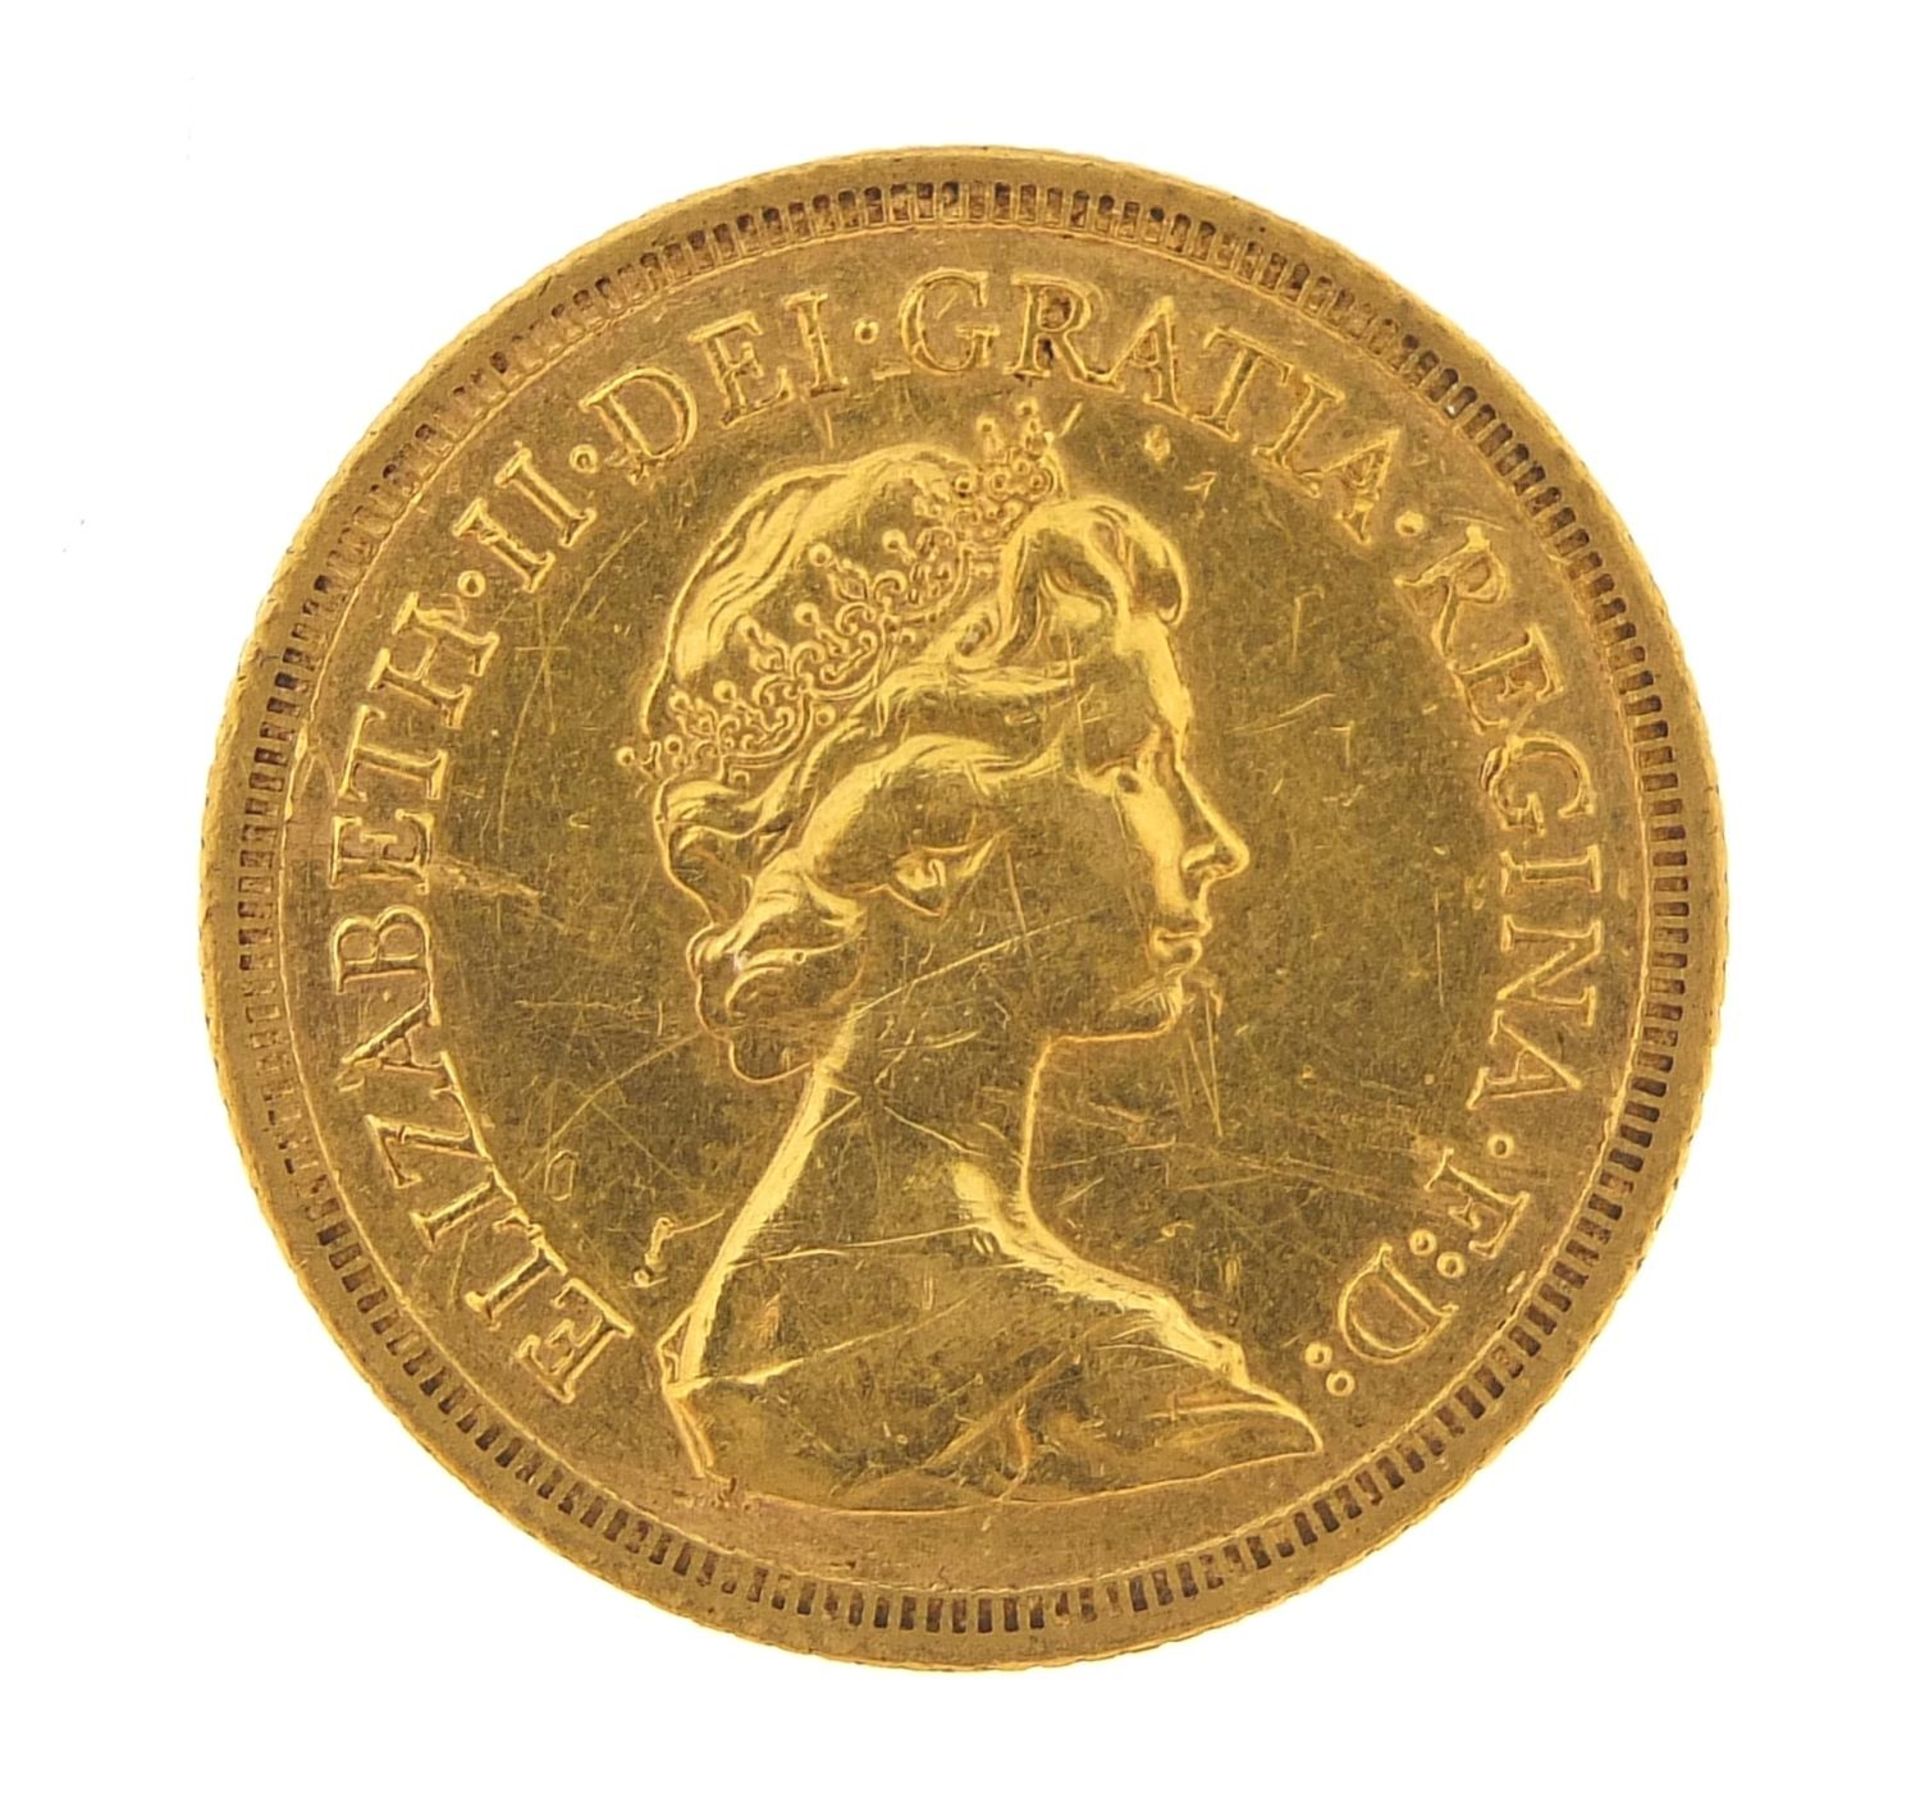 Elizabeth II 1978 gold sovereign - this lot is sold without buyer?s premium, the hammer price is the - Image 2 of 3